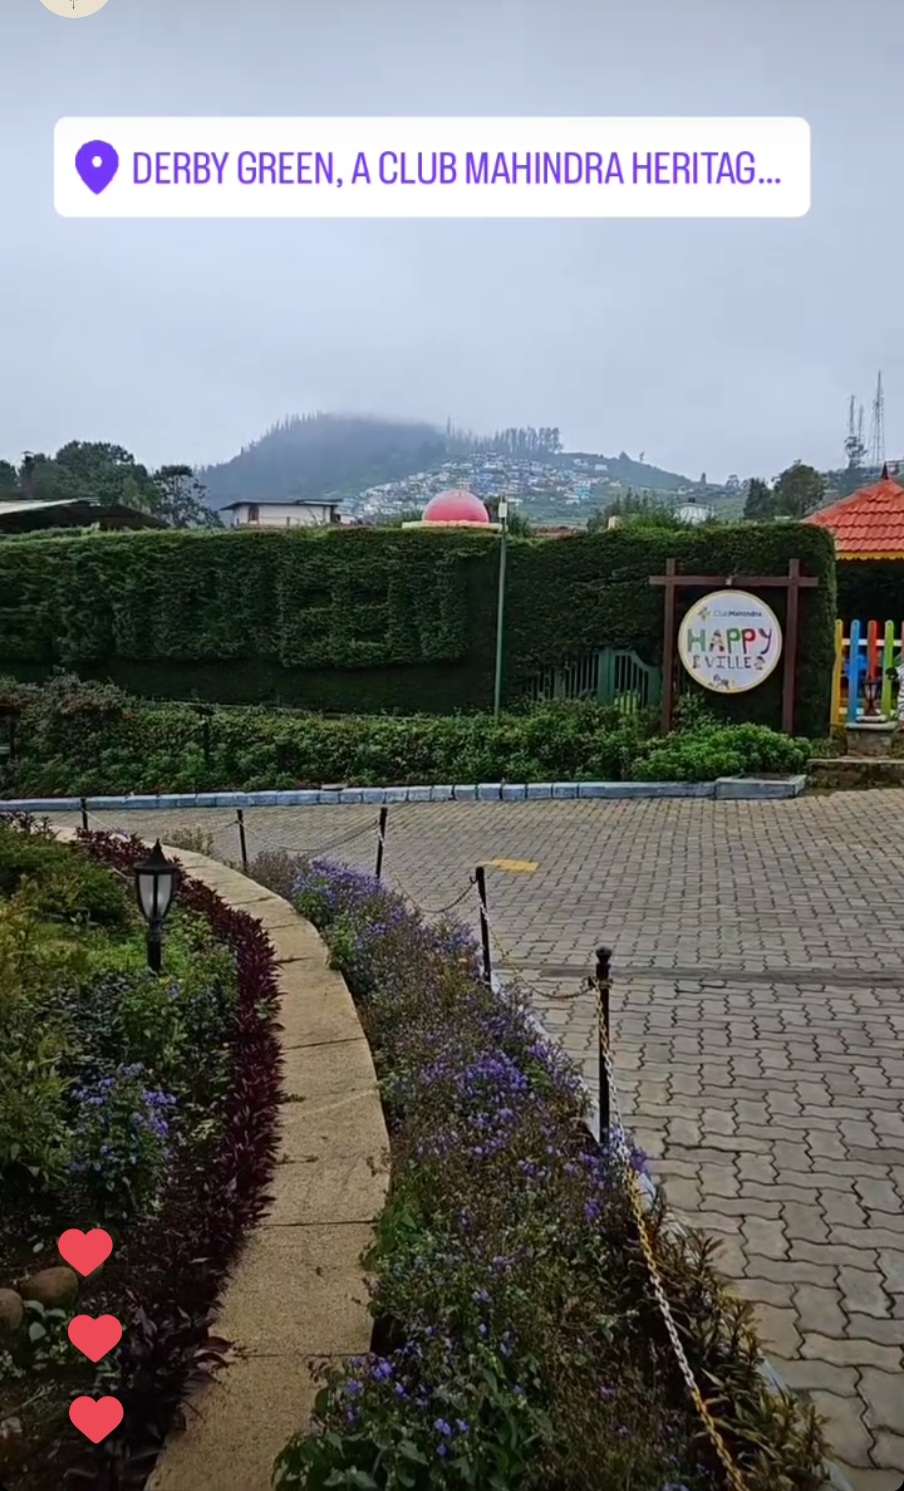 Road trip from Mumbai to amazing Derby Green Ooty